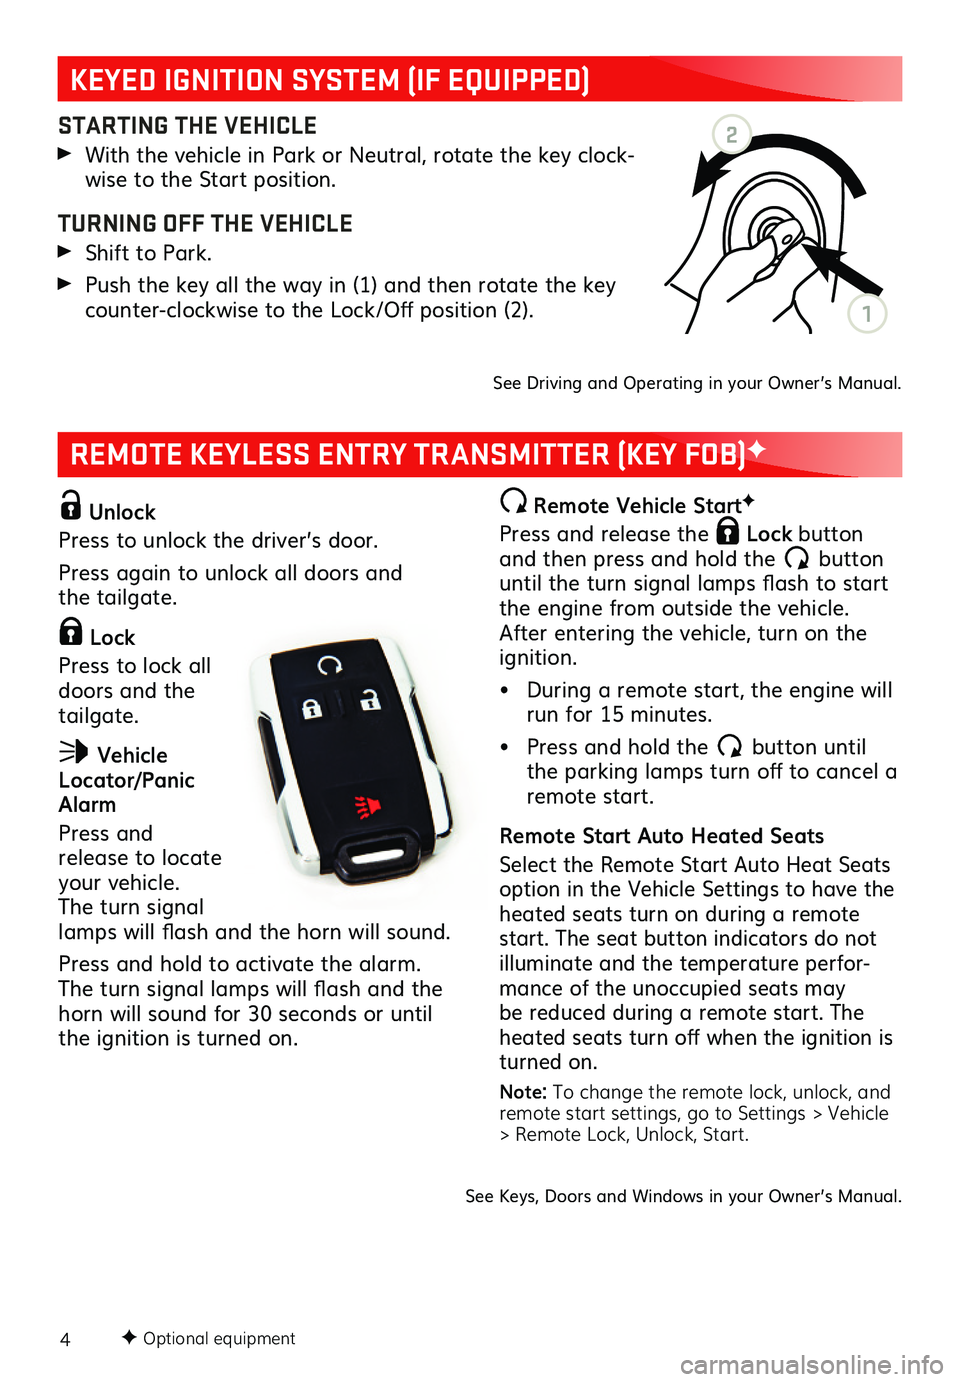 GMC CANYON 2020  Get To Know Guide 4
REMOTE KEYLESS ENTRY TRANSMITTER (KEY FOB)F
F Optional equipment
 Unlock
Press to unlock the driver’s door. 
Press again to unlock all doors and  the tailgate.
 Lock 
Press to lock all doors and t